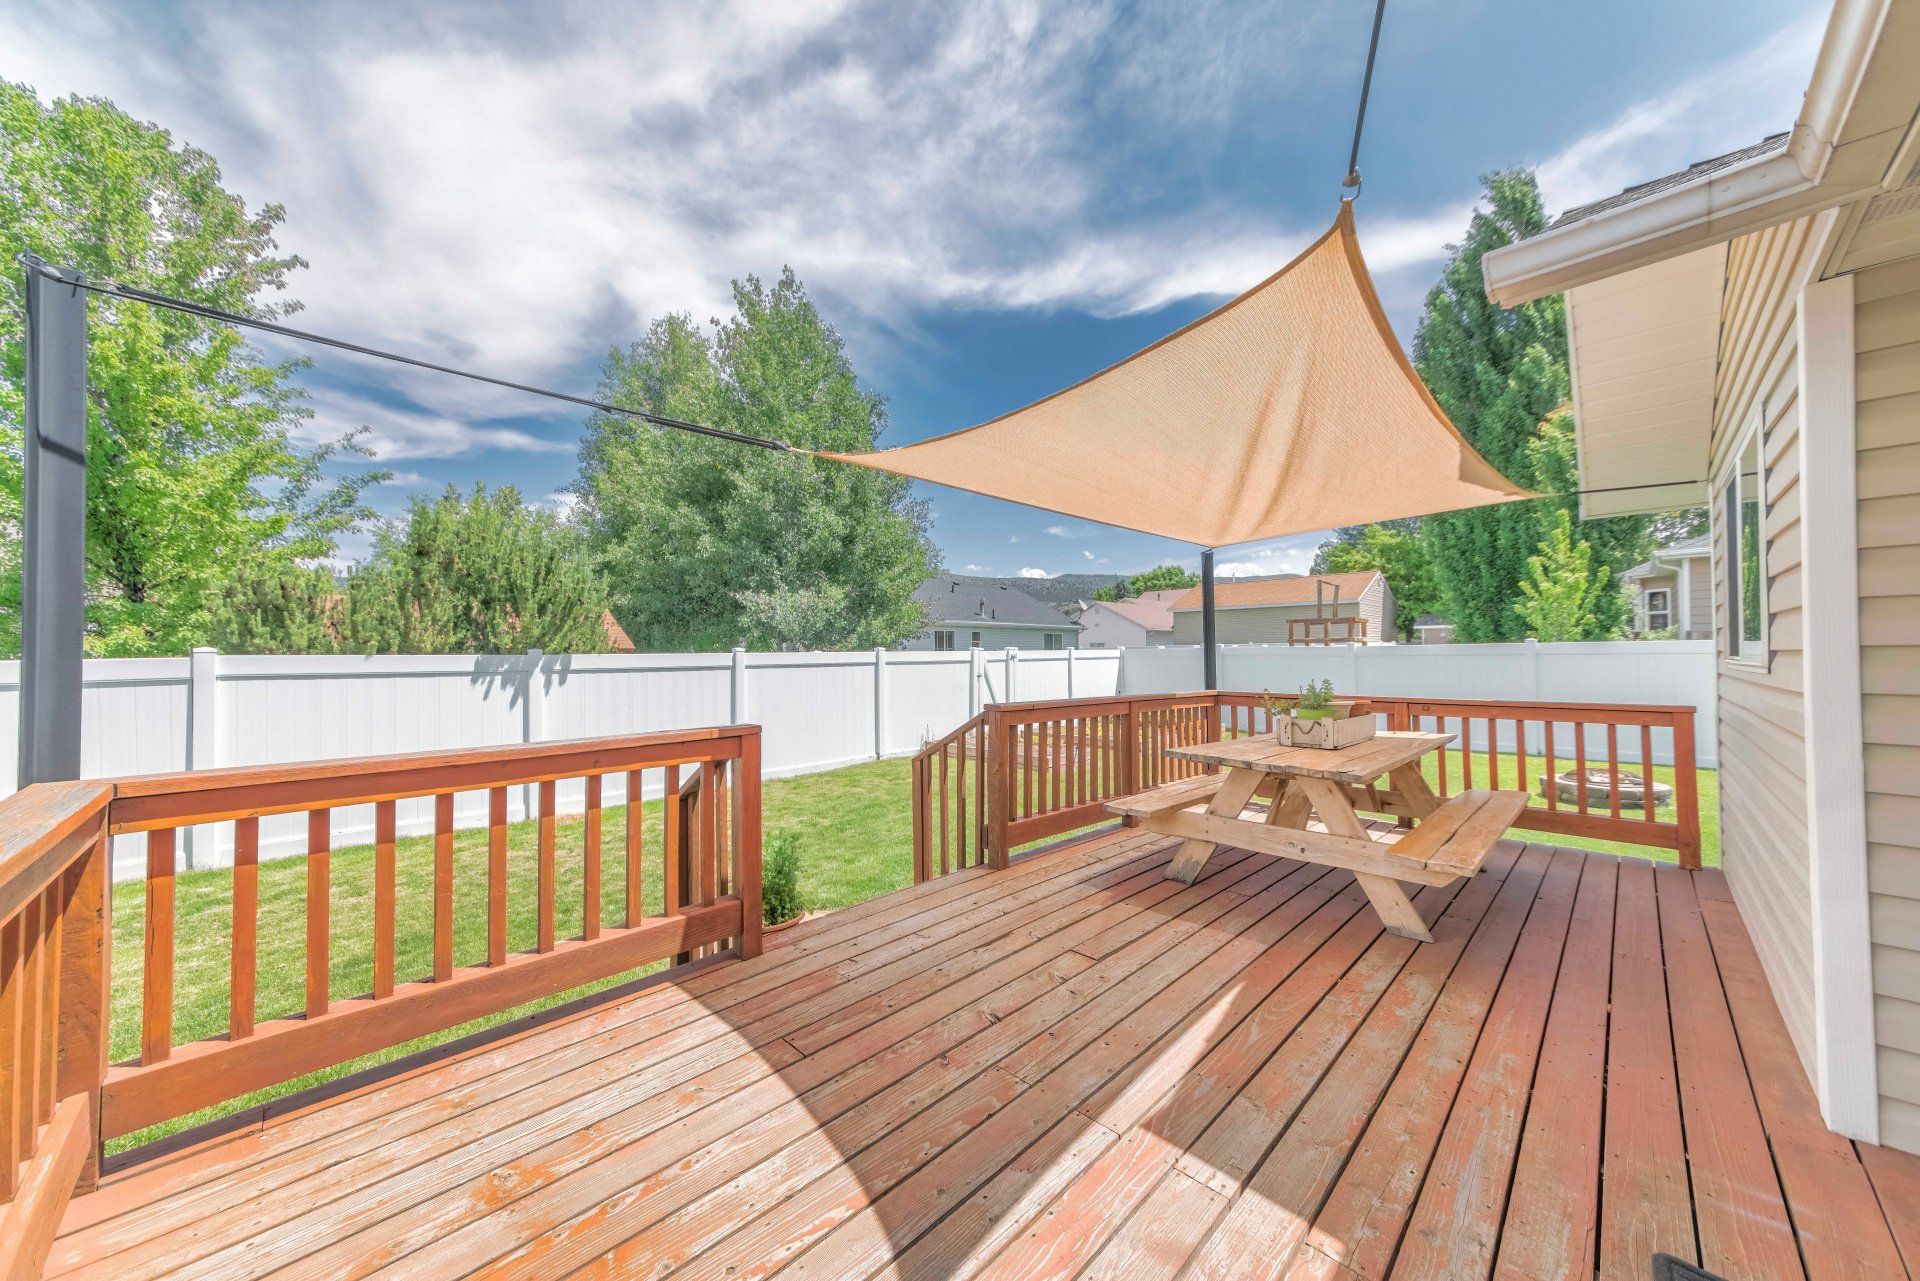 Awning covering backyard patio and picnic table